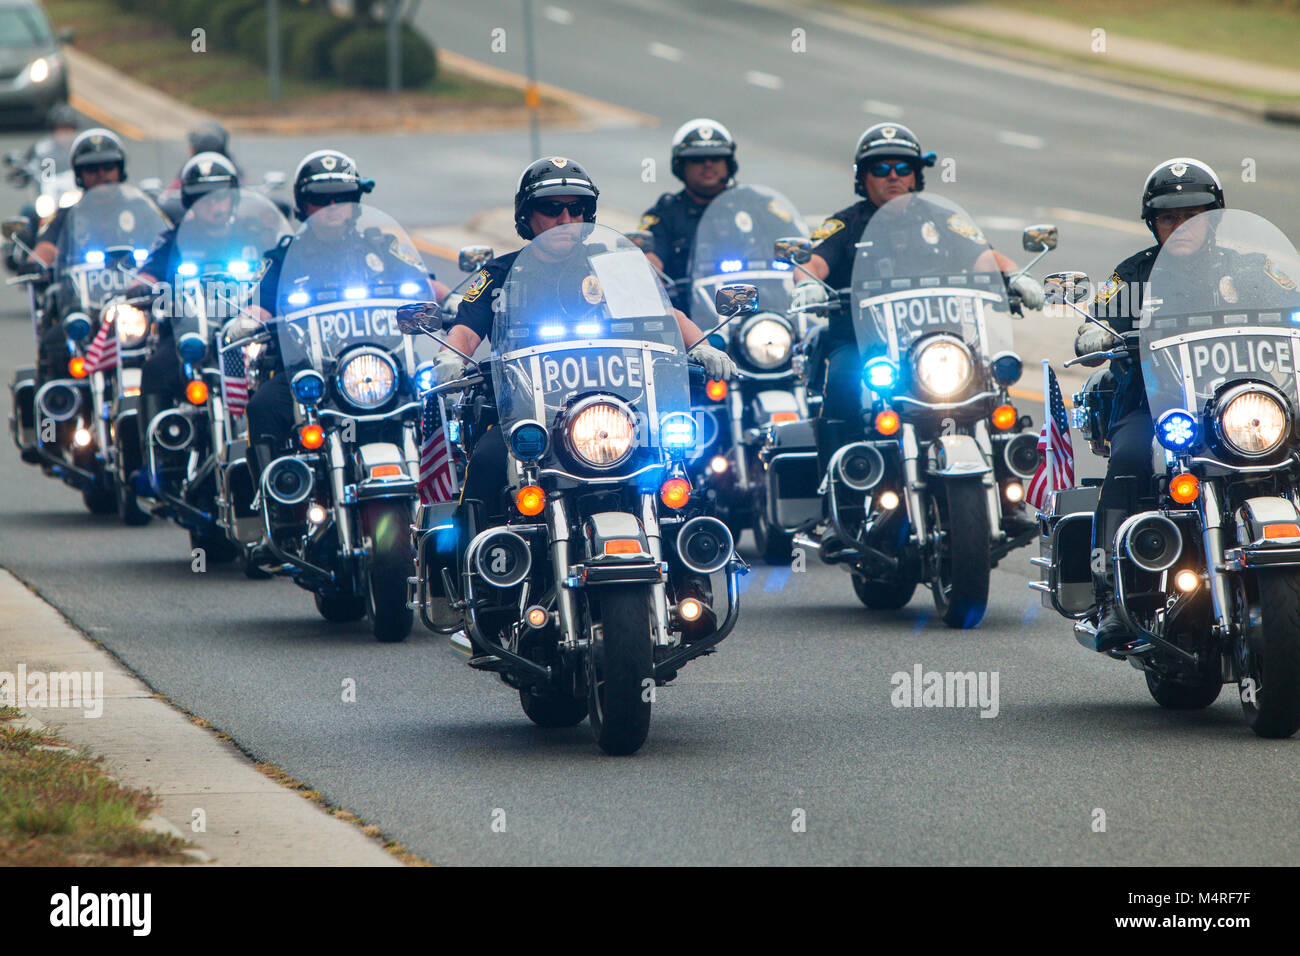 Several police officers on motorcycles provide an escort to motorcyclists about to start a charity bike ride in Buford, GA on October 7, 2017. Stock Photo